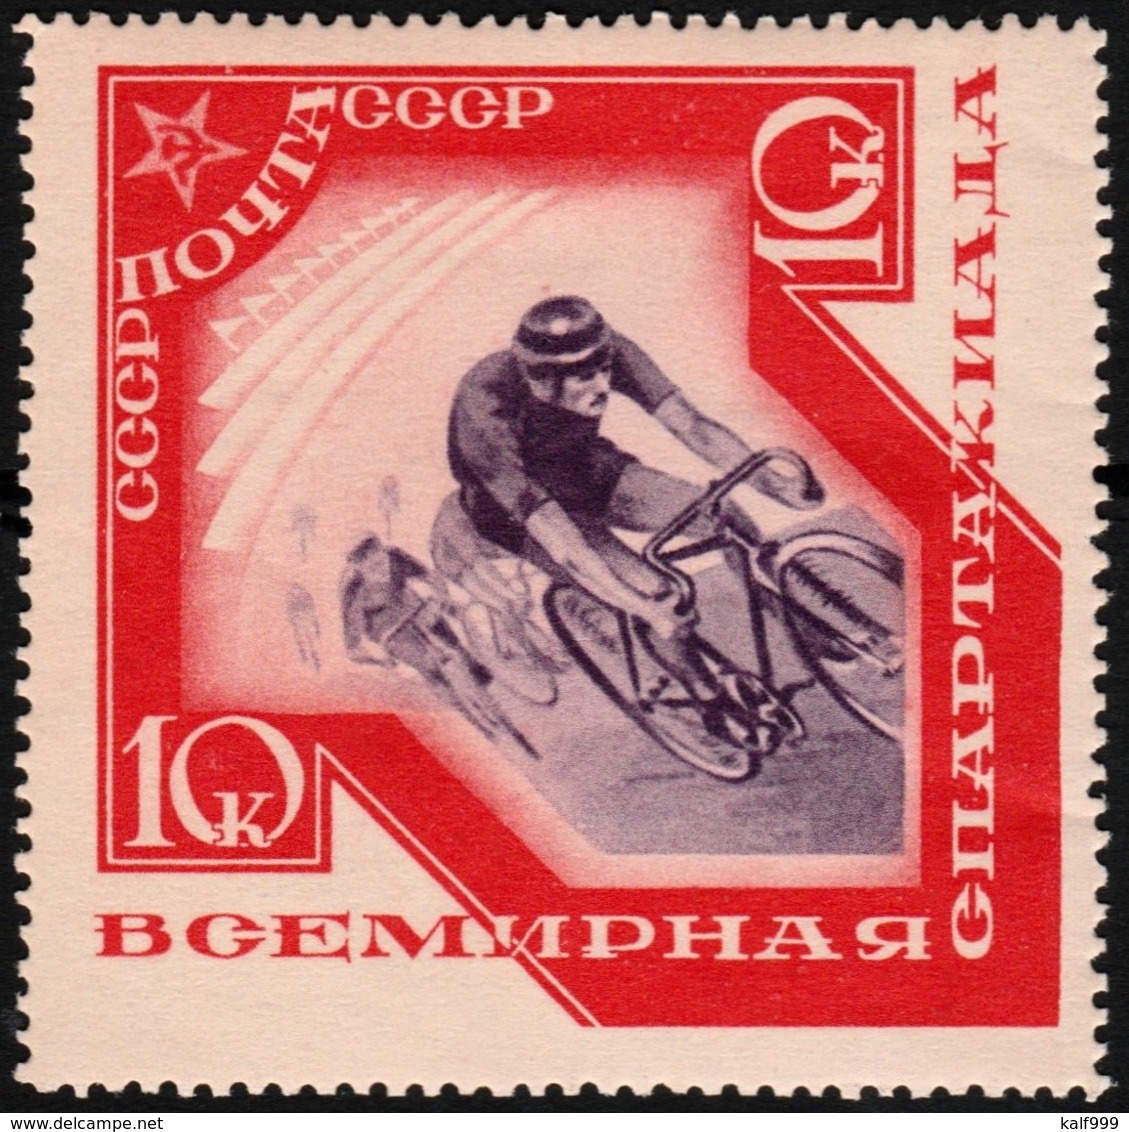 ~~~  Sowjet Union 1935 - Spartakiade Sports Cycling - Mi. 518 MH * OG ~~~ - Unused Stamps